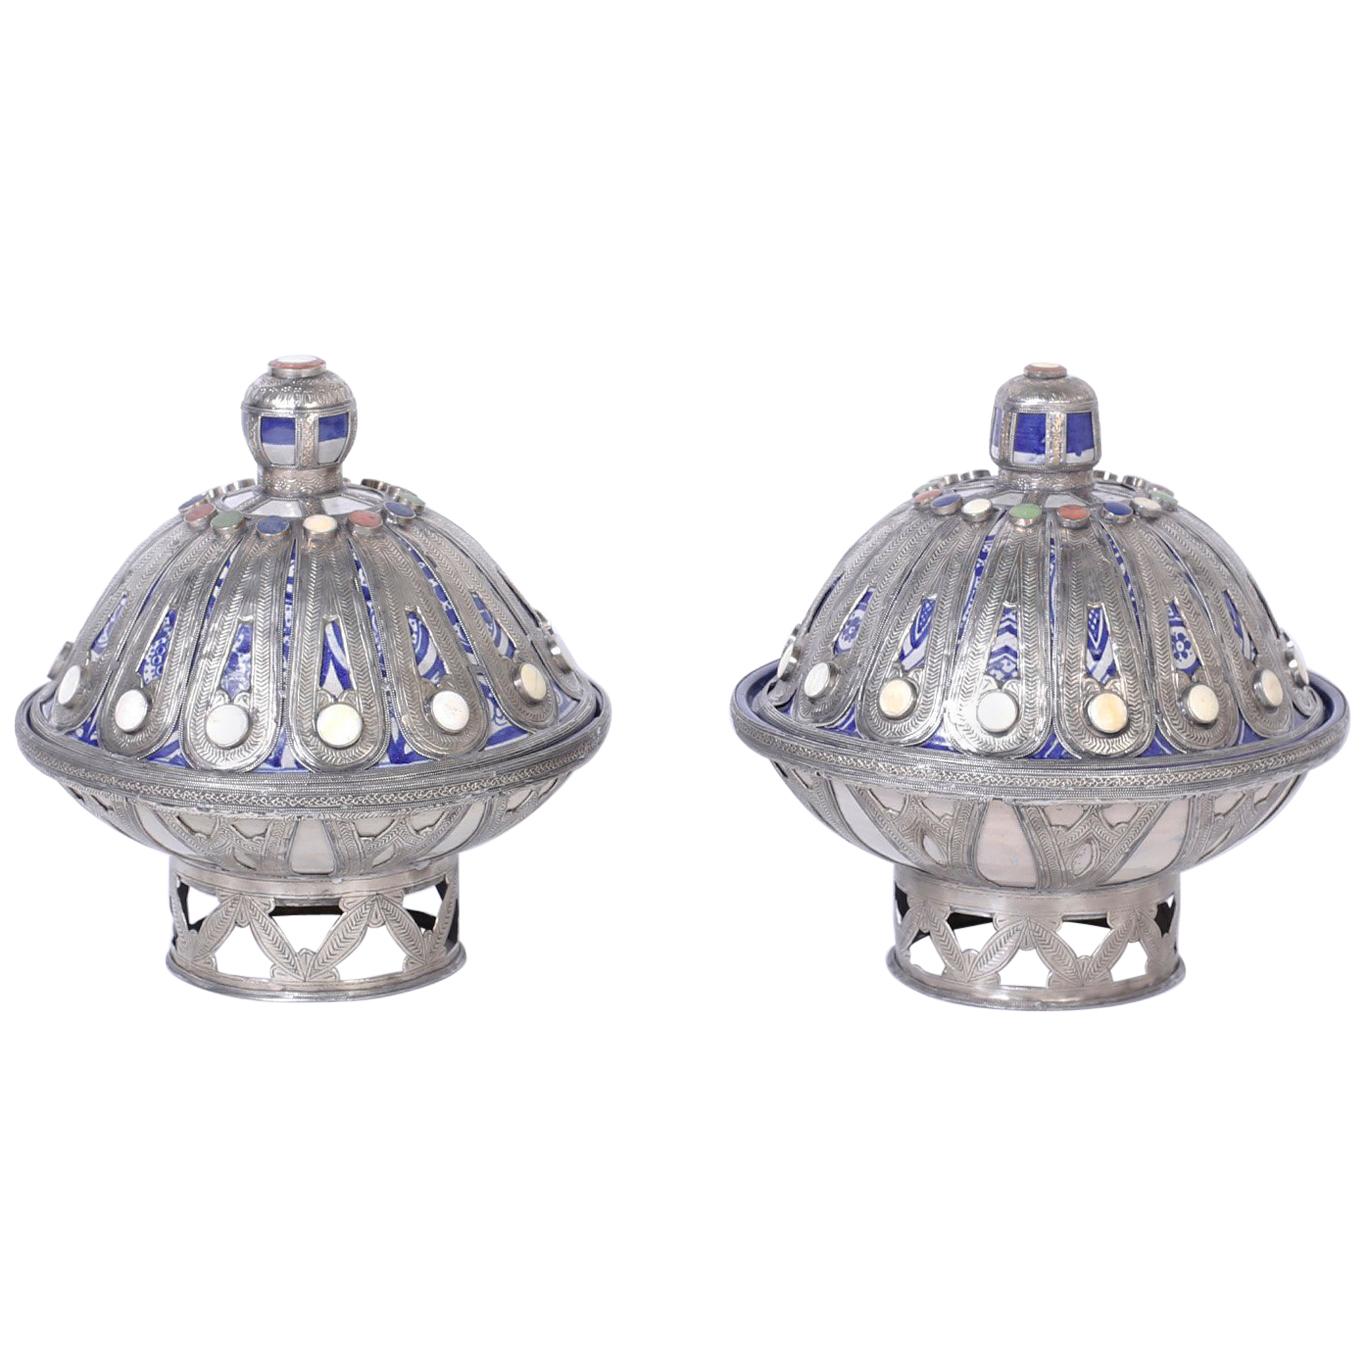 Pair of Moroccan Lidded Containers